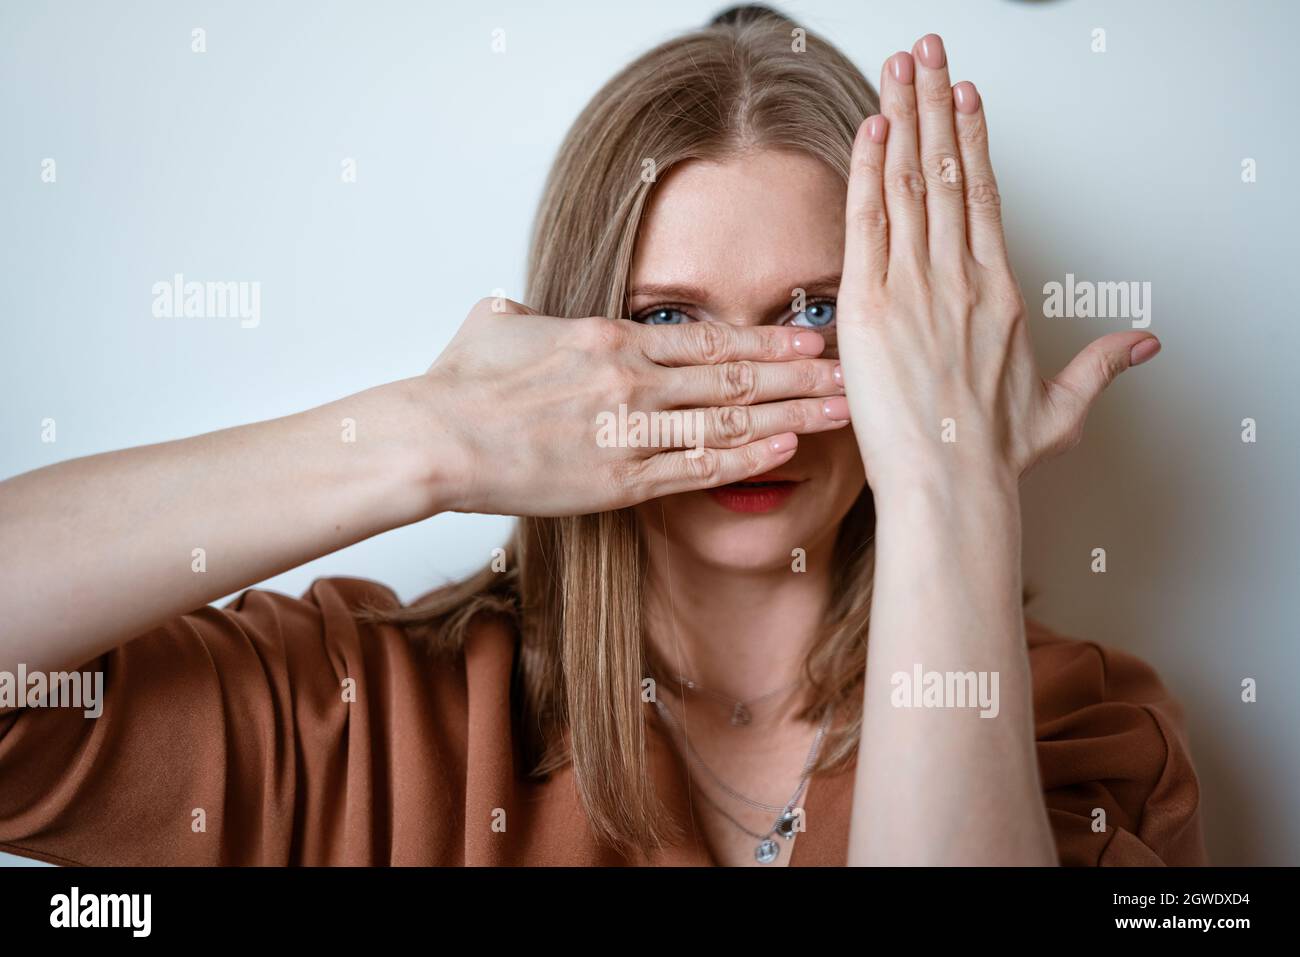 Woman Covers Her Face With Her Hands Stock Photo